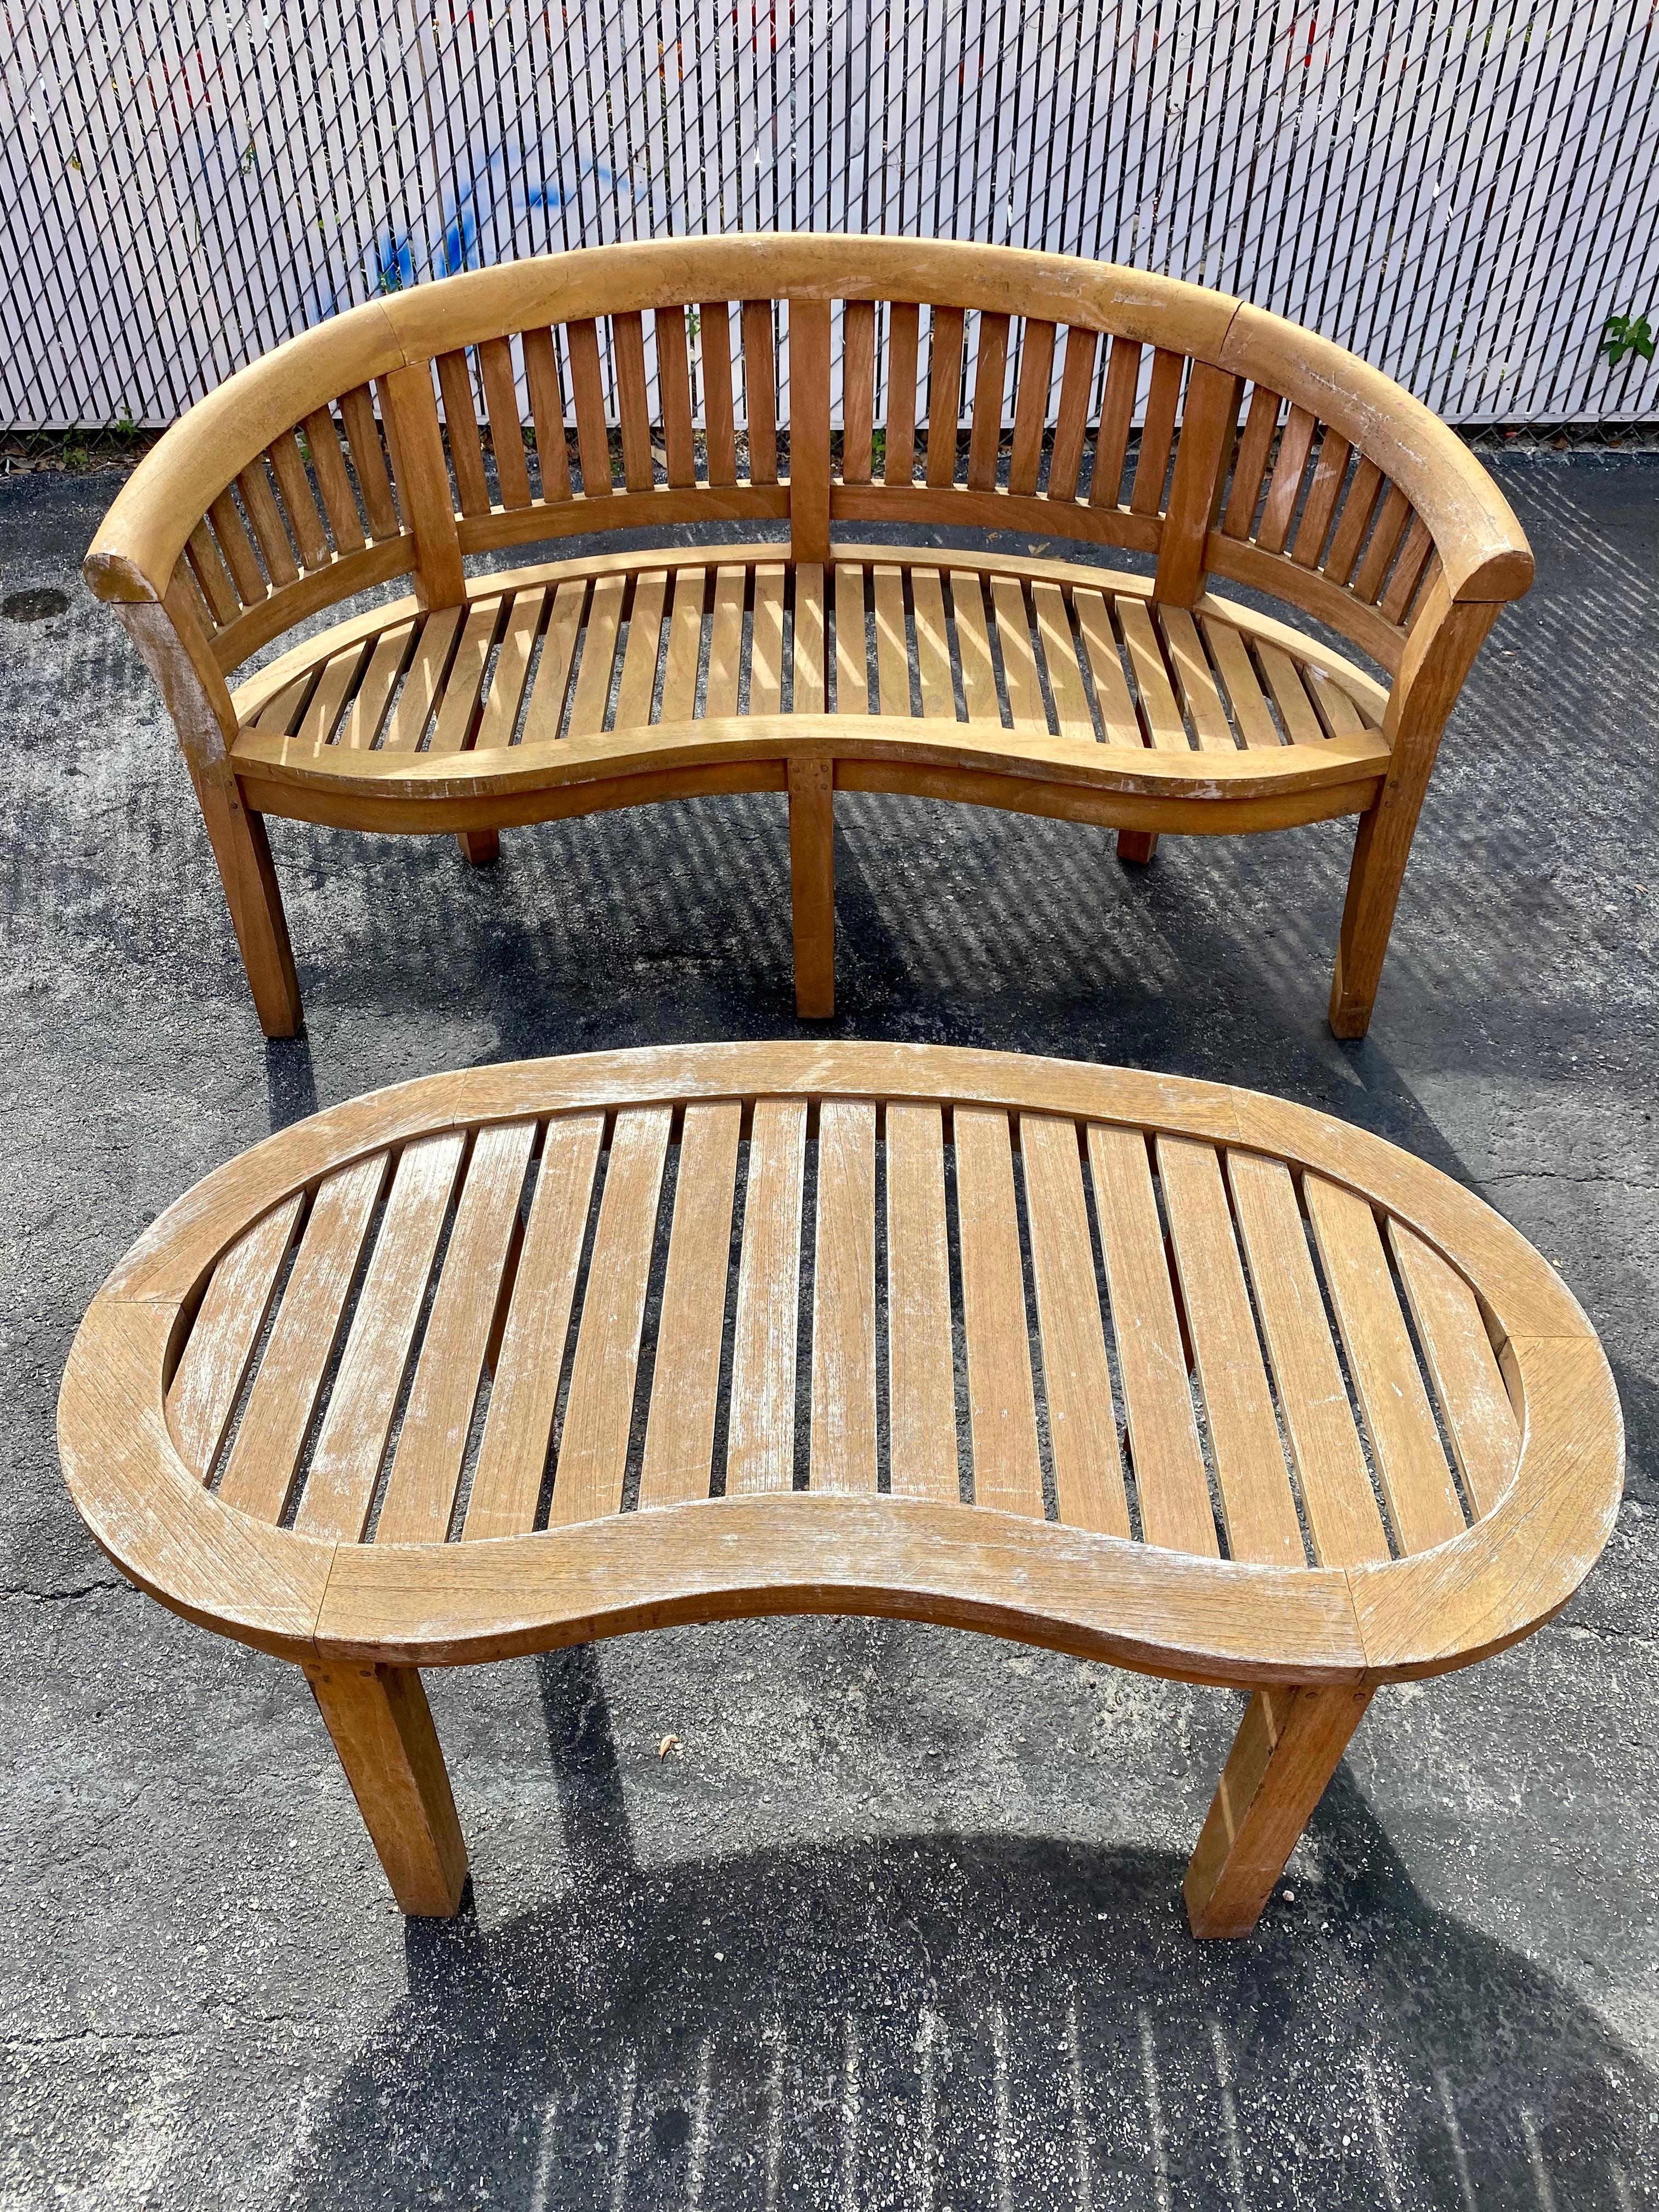 1970s Teak Curved Barrel Kidney Slatted Settee Table Chairs, Set of 4 For Sale 1